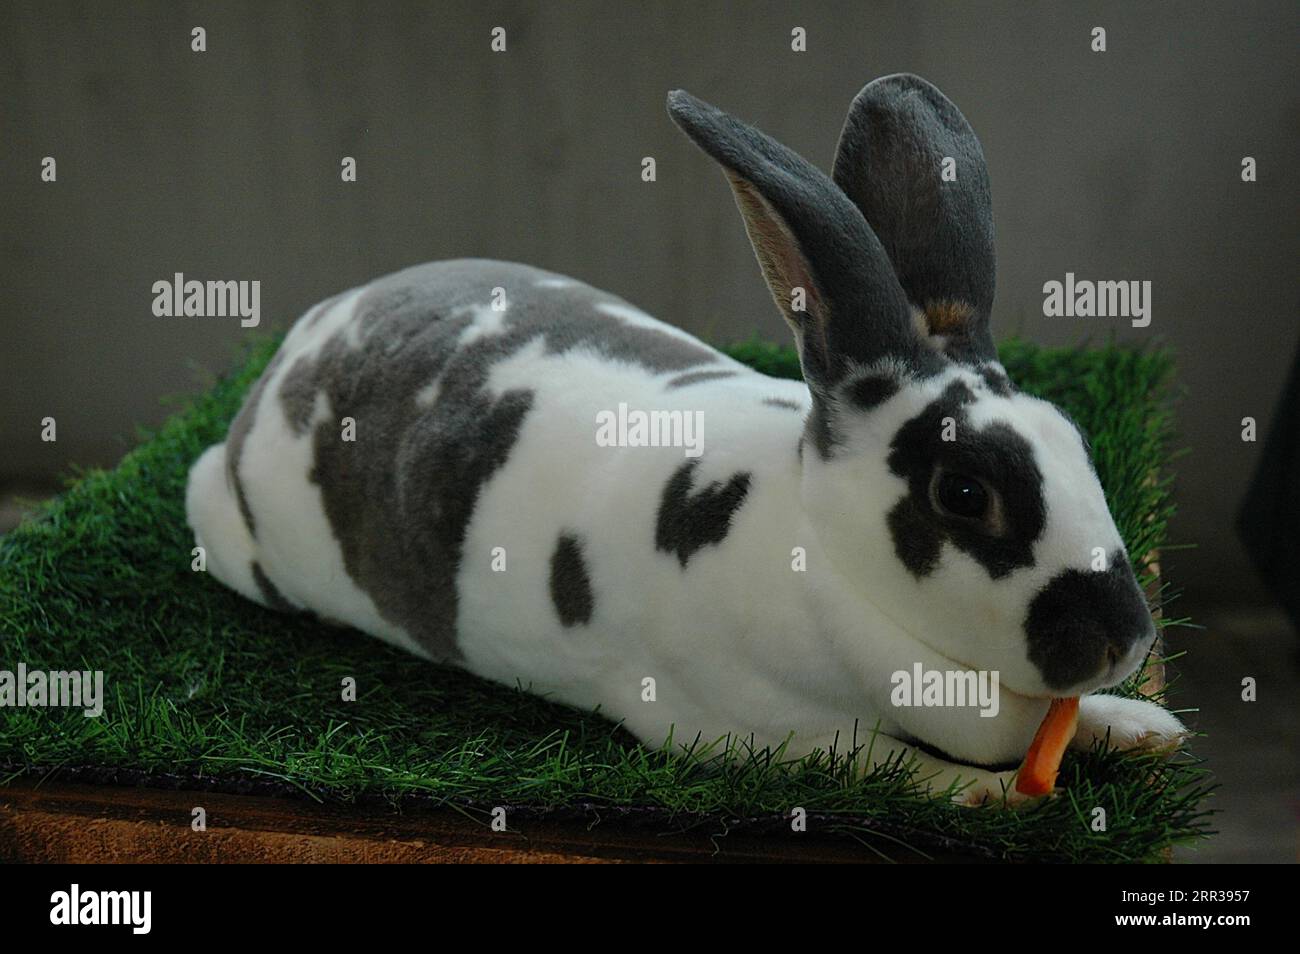 An adorable, fluffy domestic rabbit hopping with relaxation. Cute and furry companion. Stock Photo